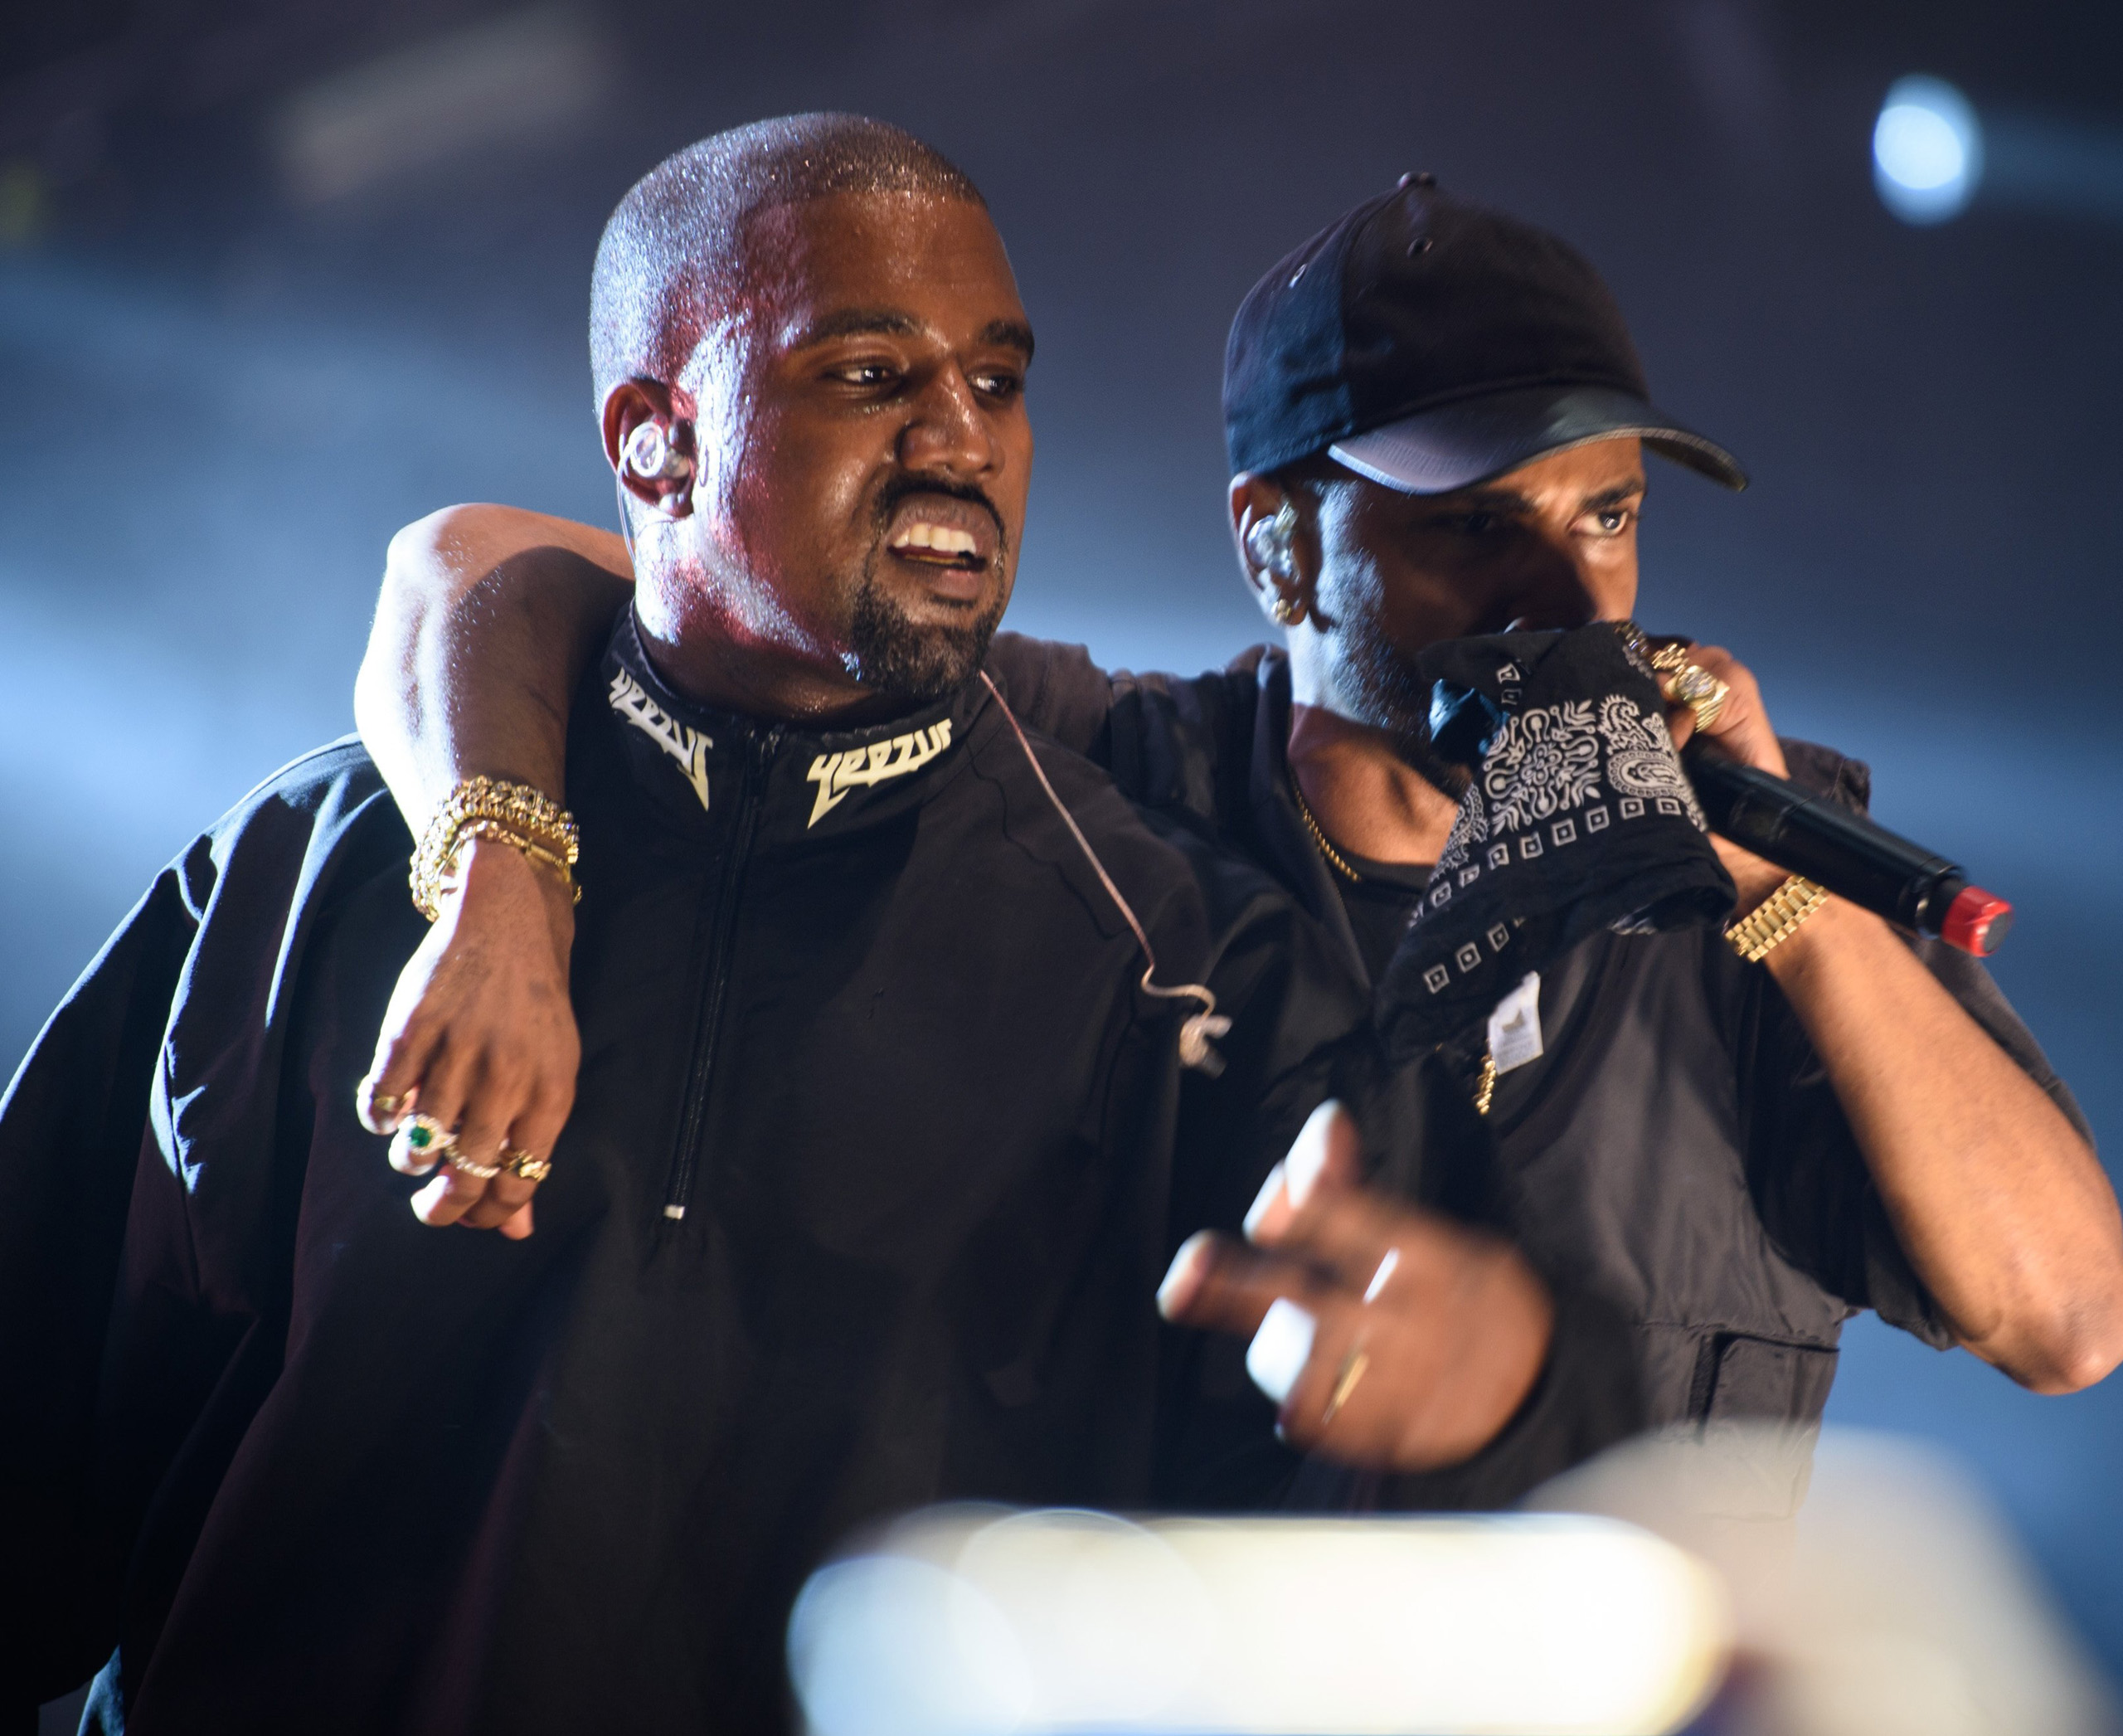 Kanye West (L)  and Big Sean (R) perform at the 2016 Hot 97 Summer Jam at MetLife Stadium in East Rutherford, New Jersey on June 5, 2016. (Dave Kotinsky—Getty Images)